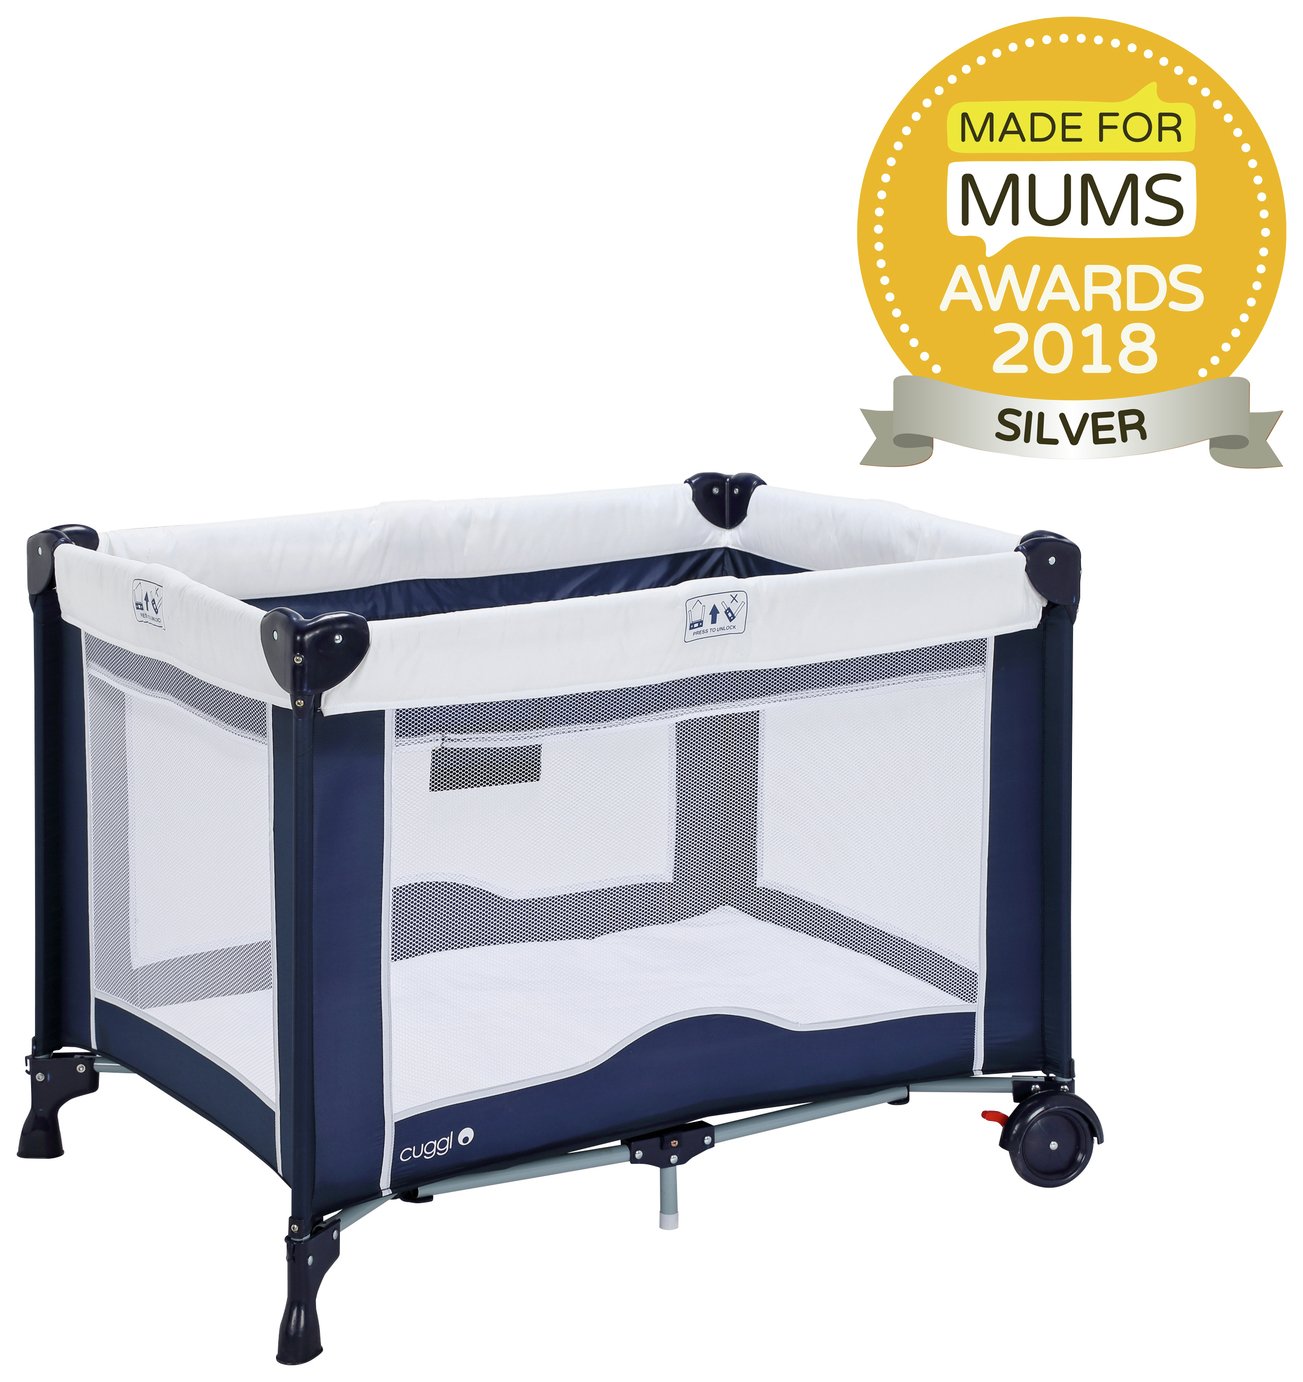 Cuggl Deluxe Travel Cot and Changer Unit Review